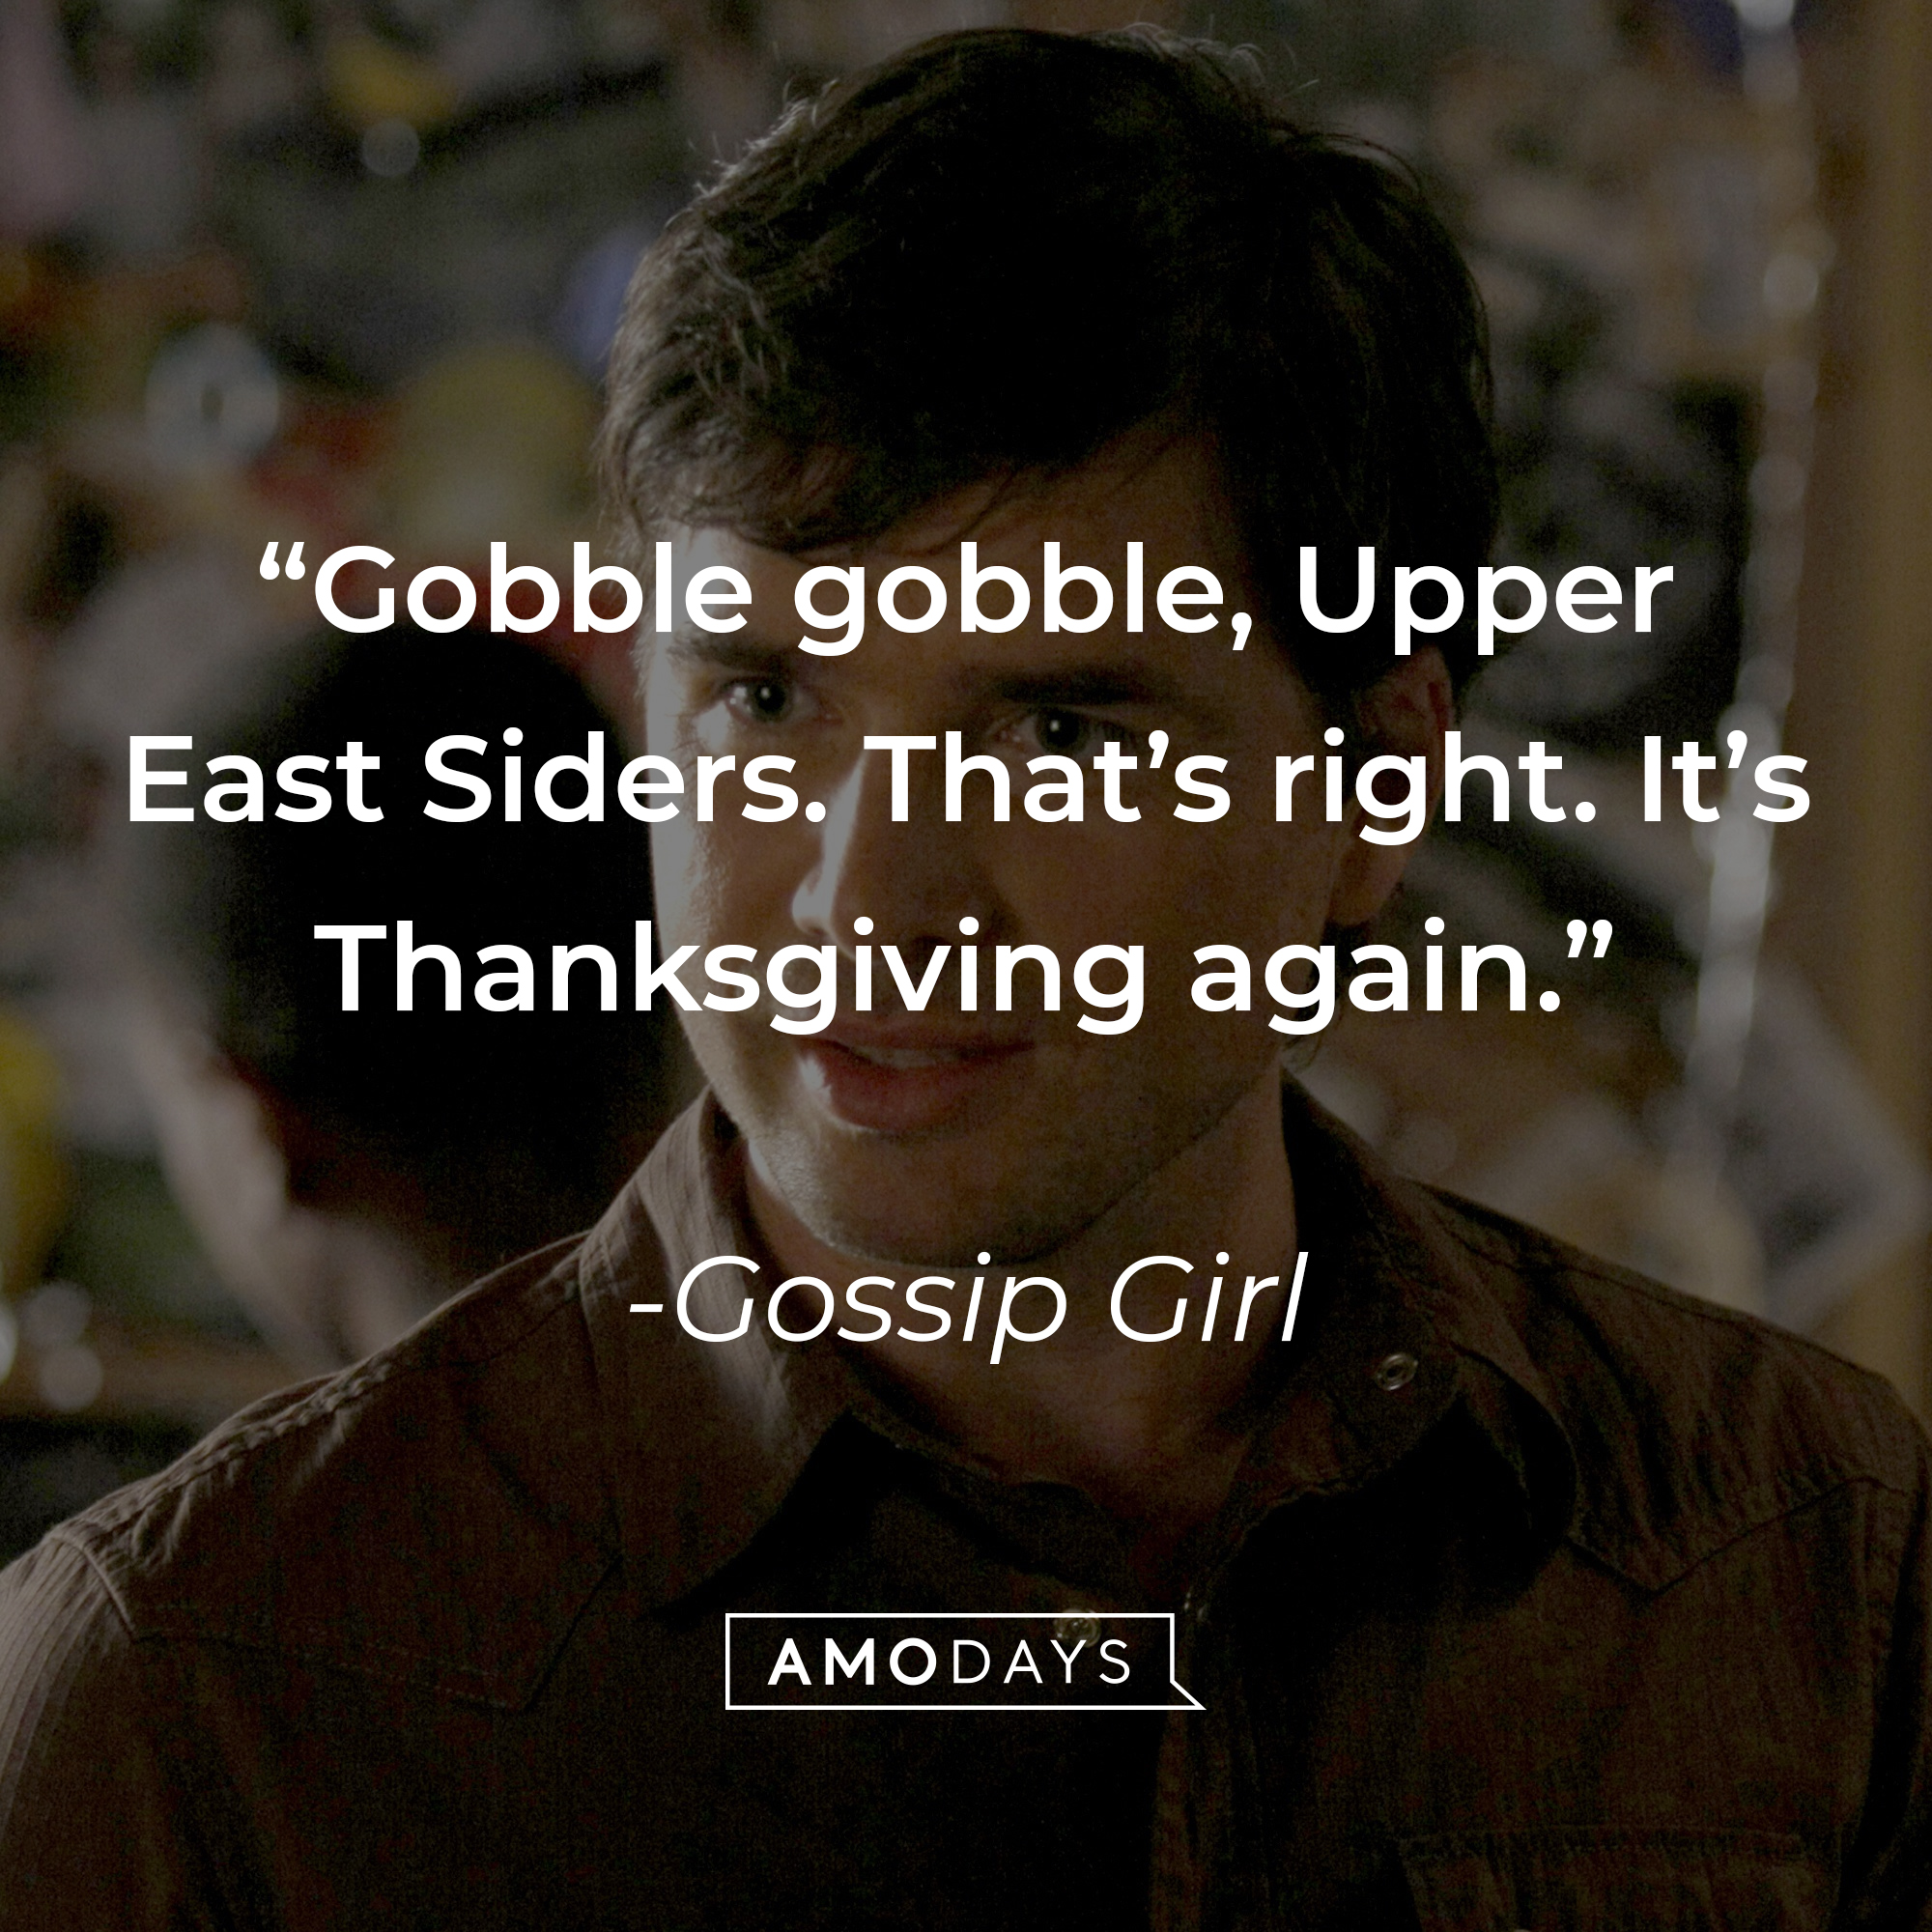 Image from "Gossip Girl" with the quote: "Gobble gobble, Upper East Siders. That’s right. It’s Thanksgiving again." | Source: facebook.com/GossipGirl